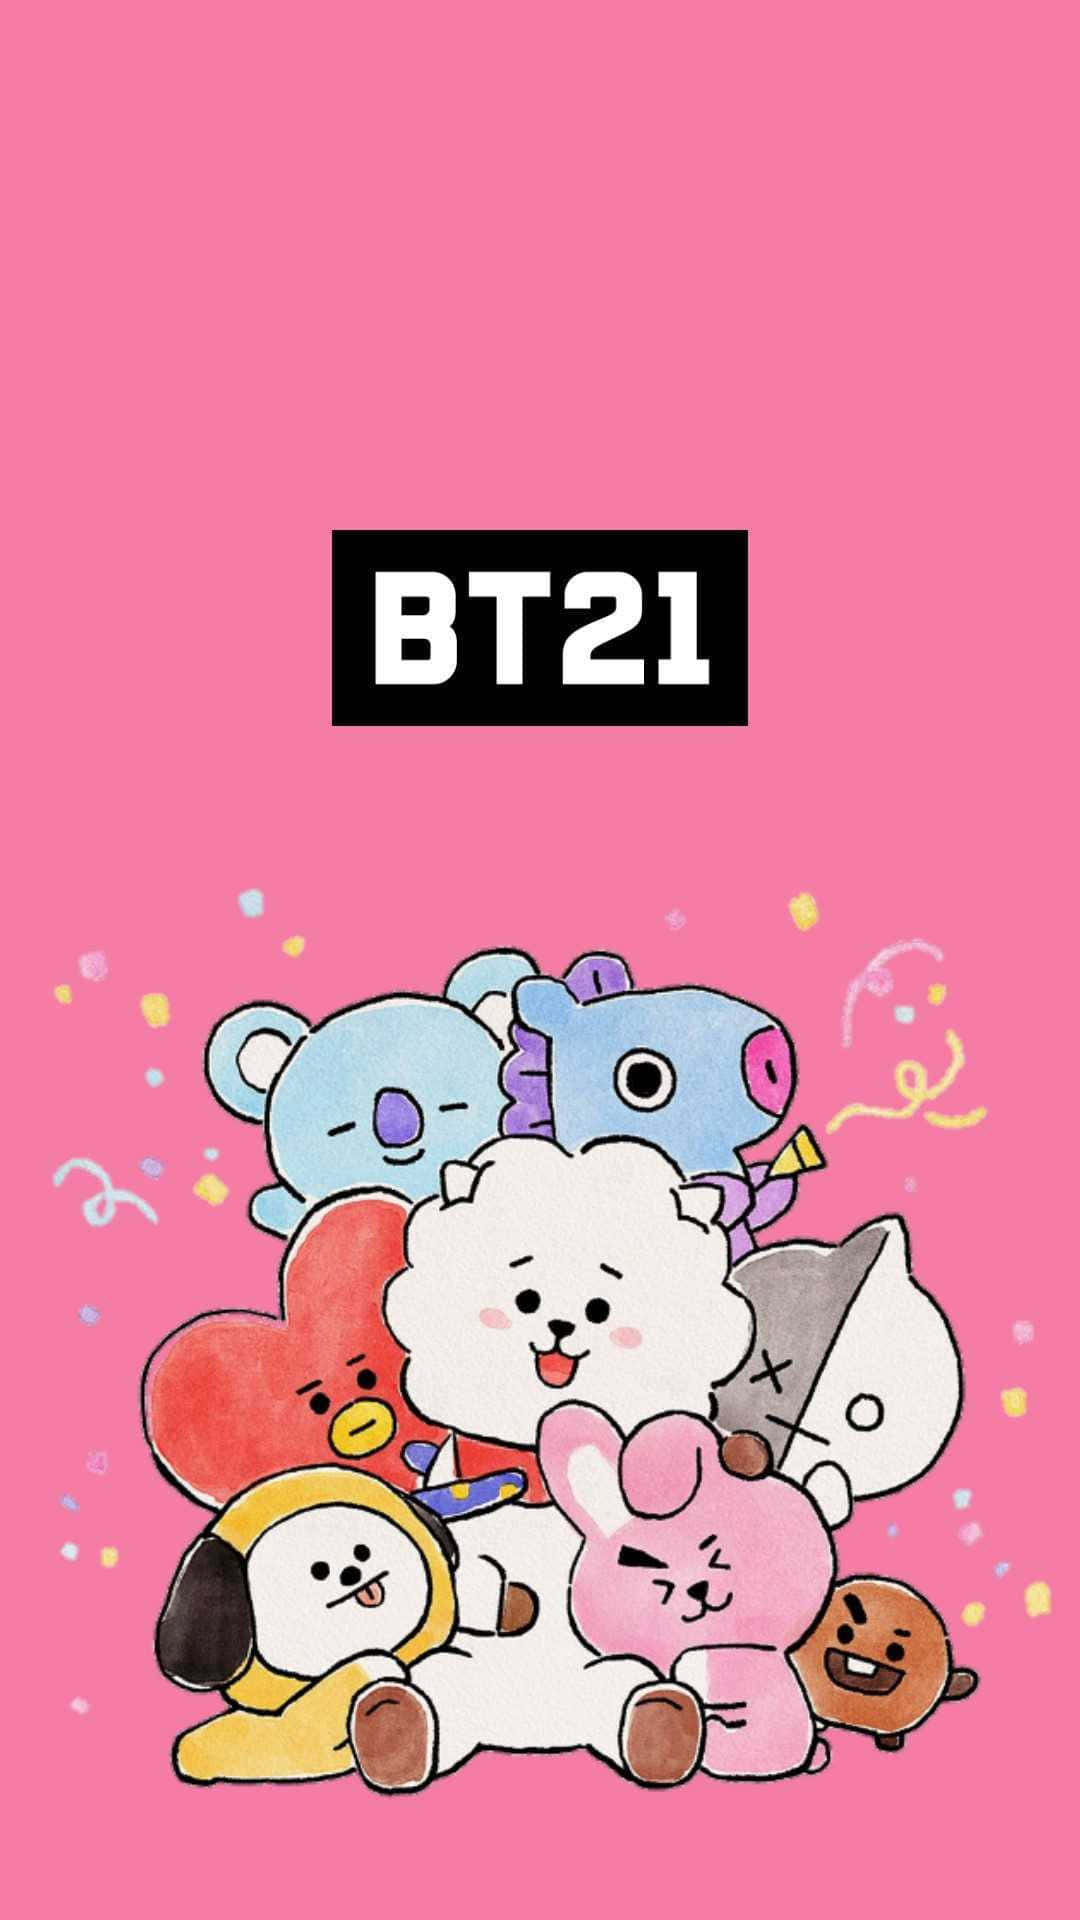 BT21 - A Universe of Adorable Characters